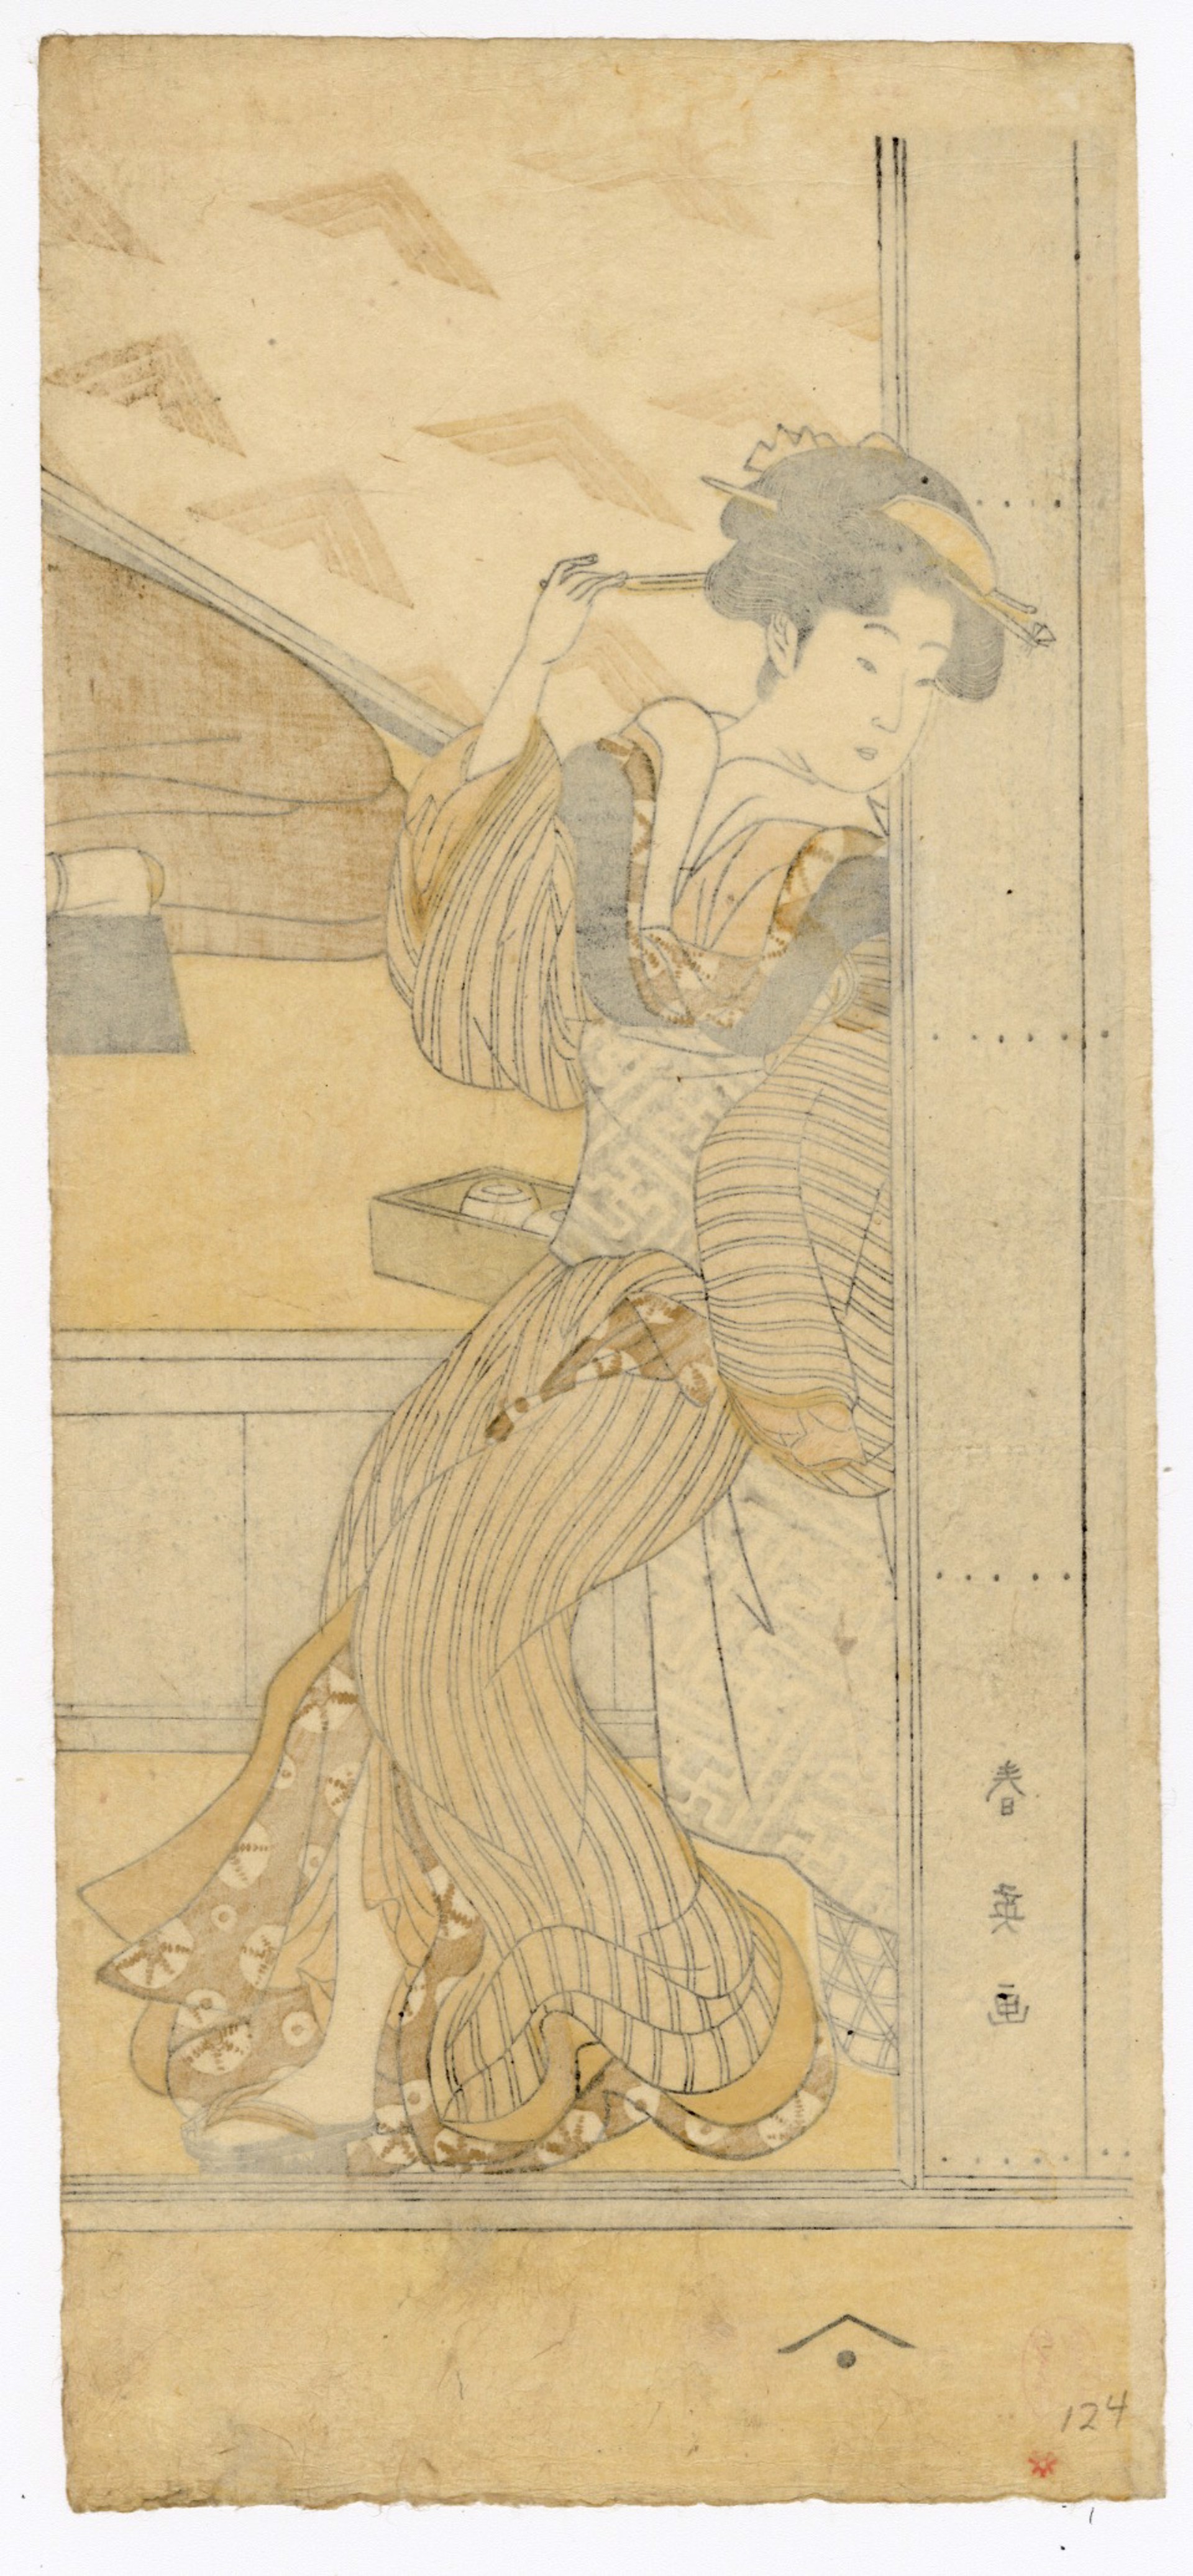 A Courtesan Leaning on her door while Soliciting Clients by Shun'ei